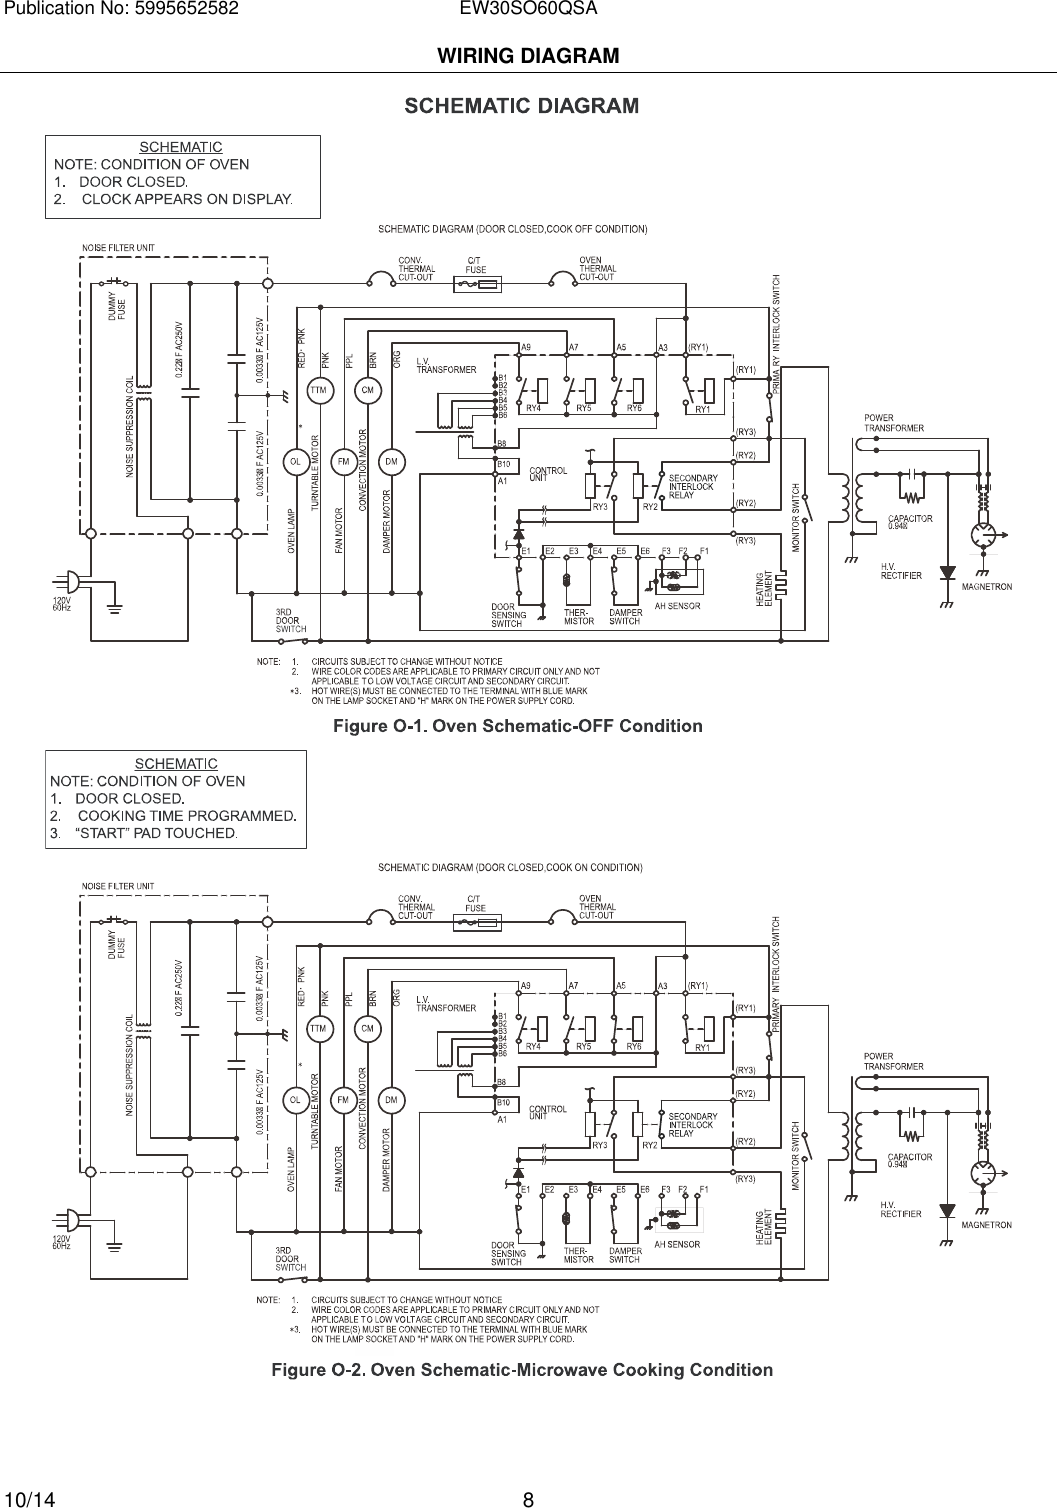 Page 8 of 8 - Electrolux Electrolux-30-Built-In-Convection-Microwave-Oven-With-Drop-Down-Door-Ew30So60Qs-Wiring-Diagram 5995652582